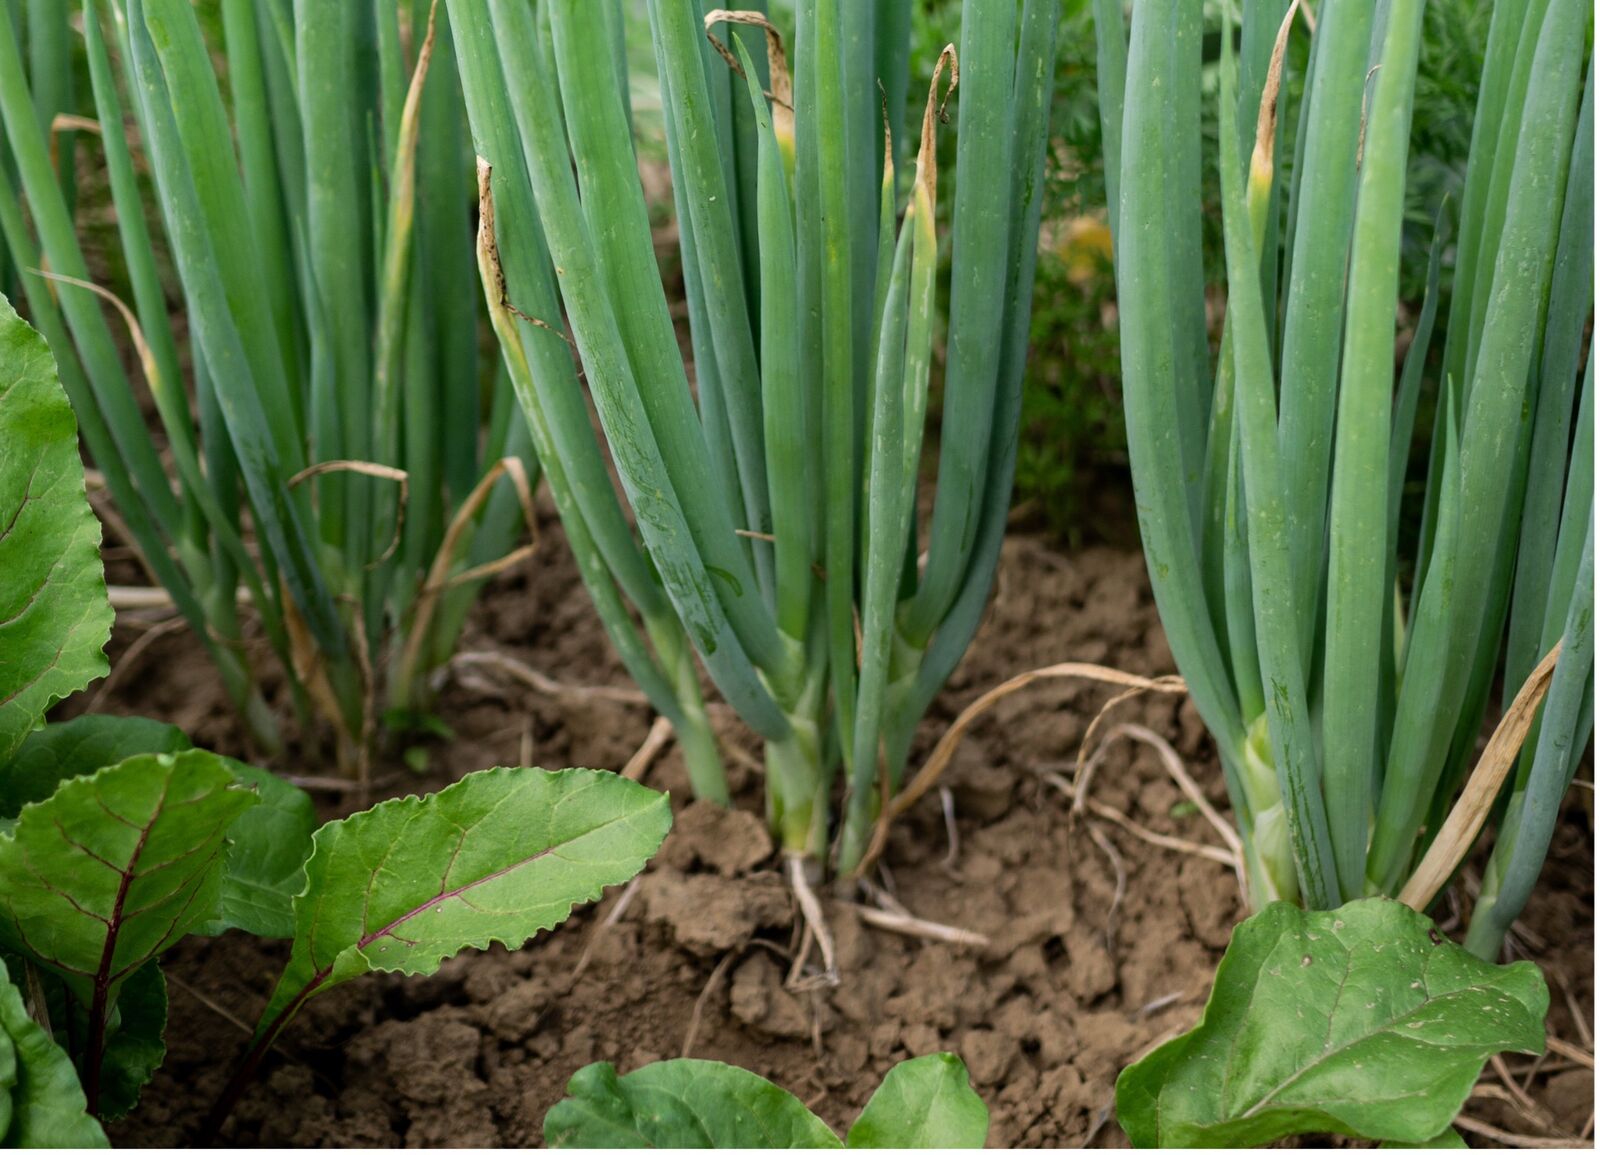 Growing onions in mixed cultivation